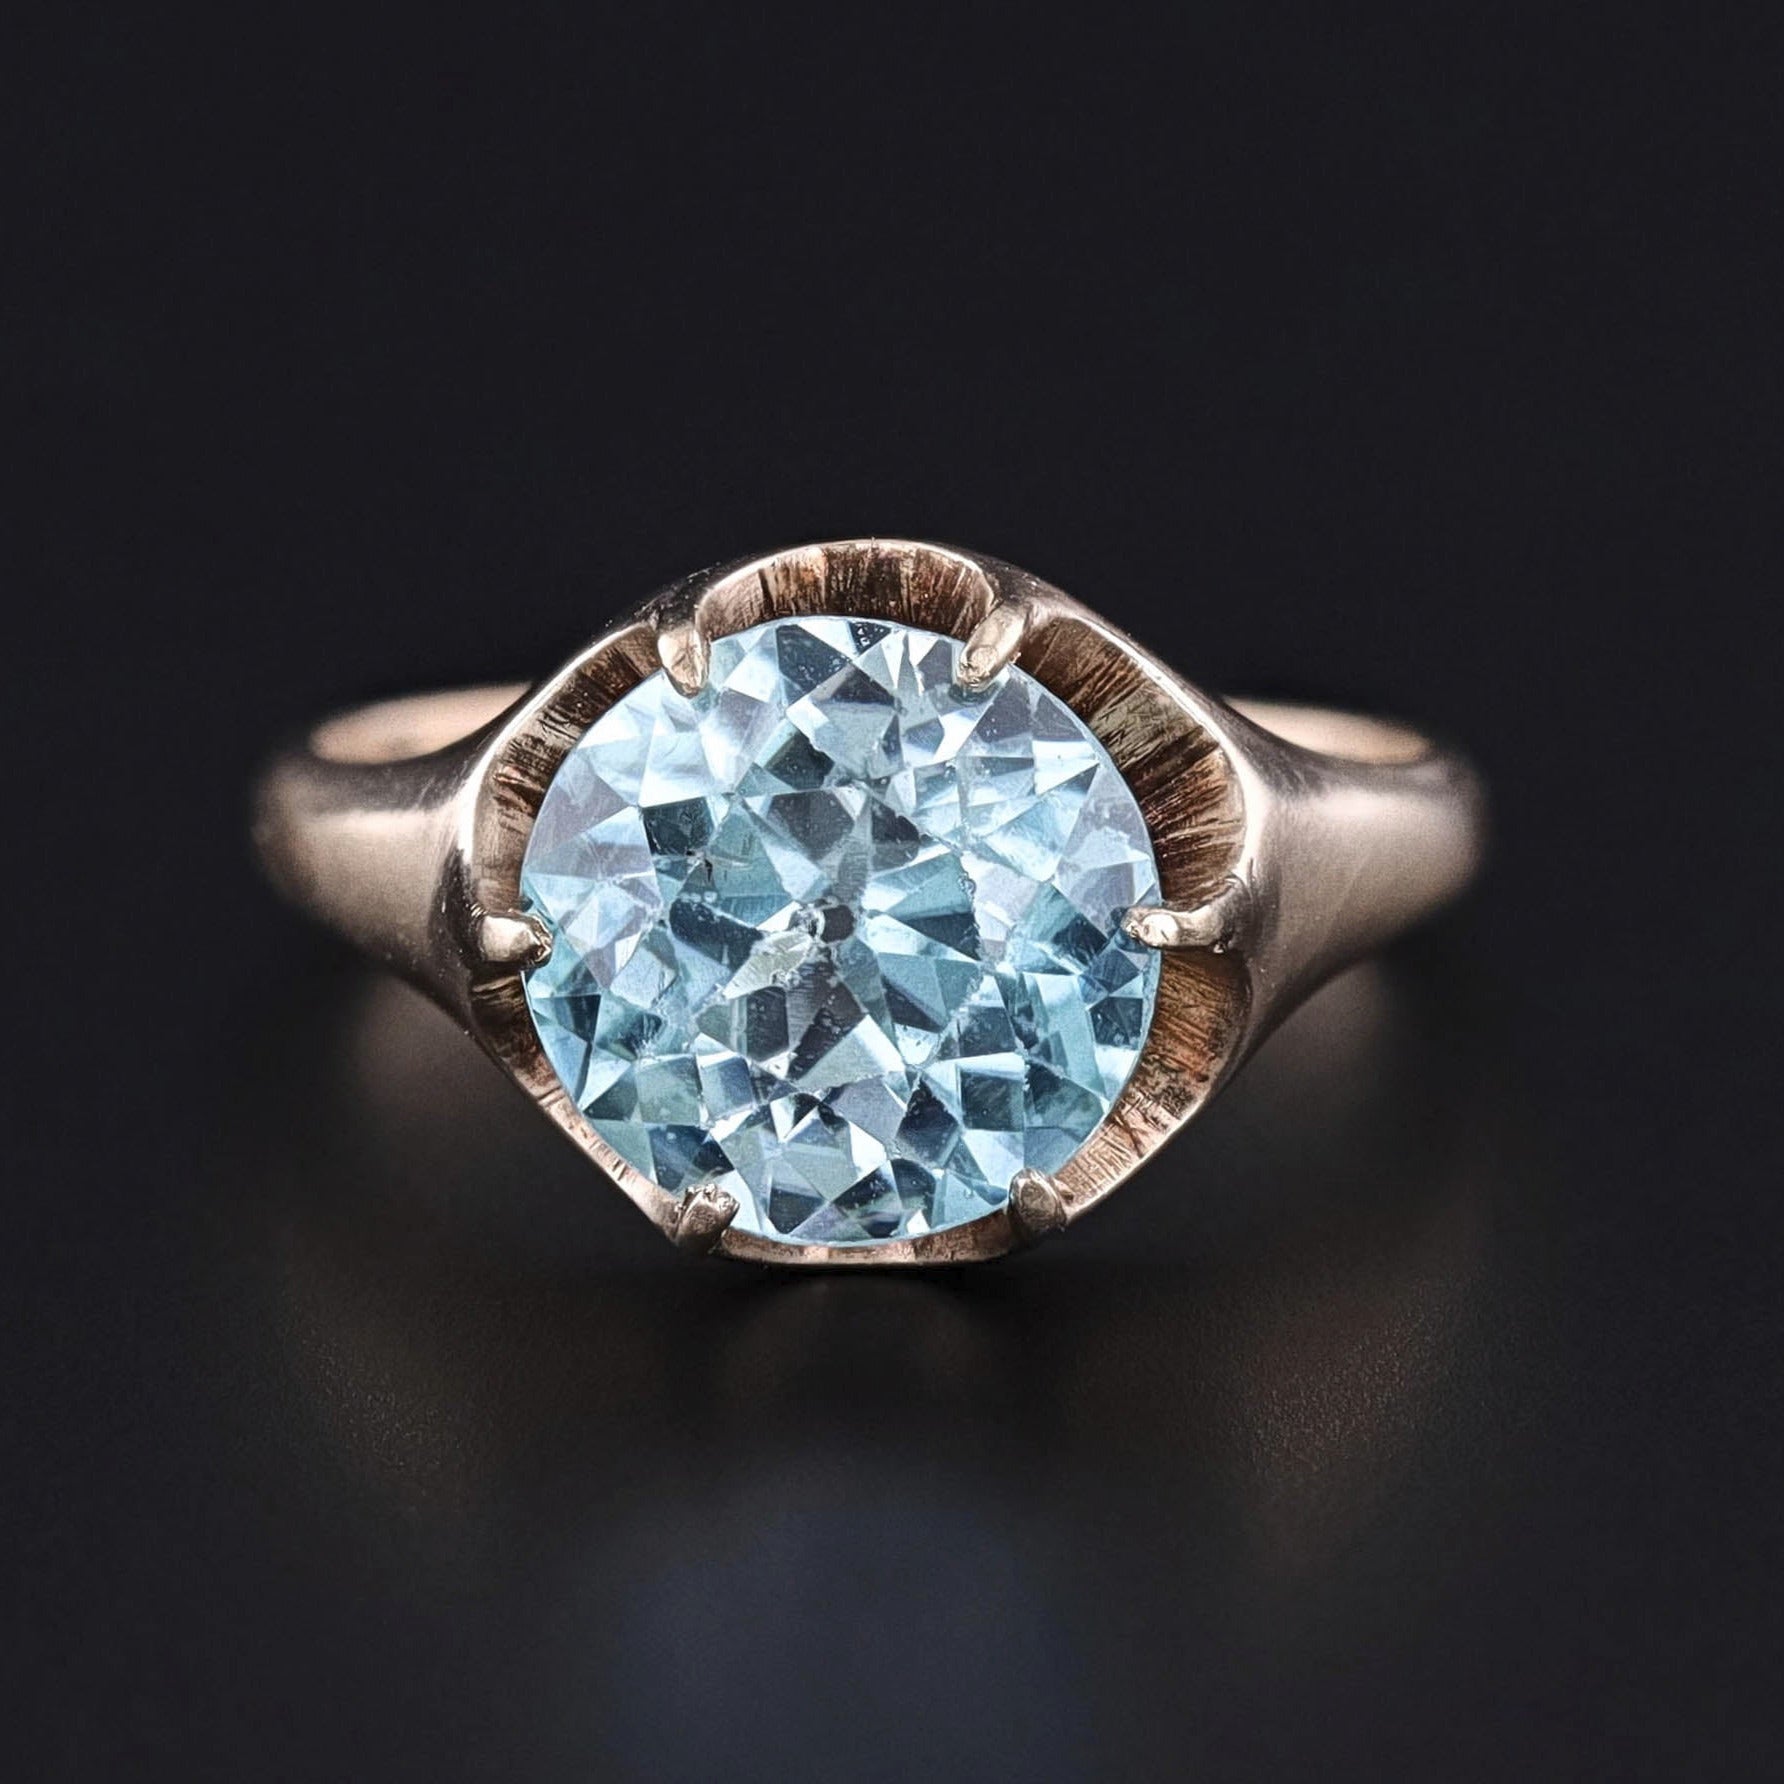 A dazzling blue zircon stone set in an antique, 14k gold mounting.